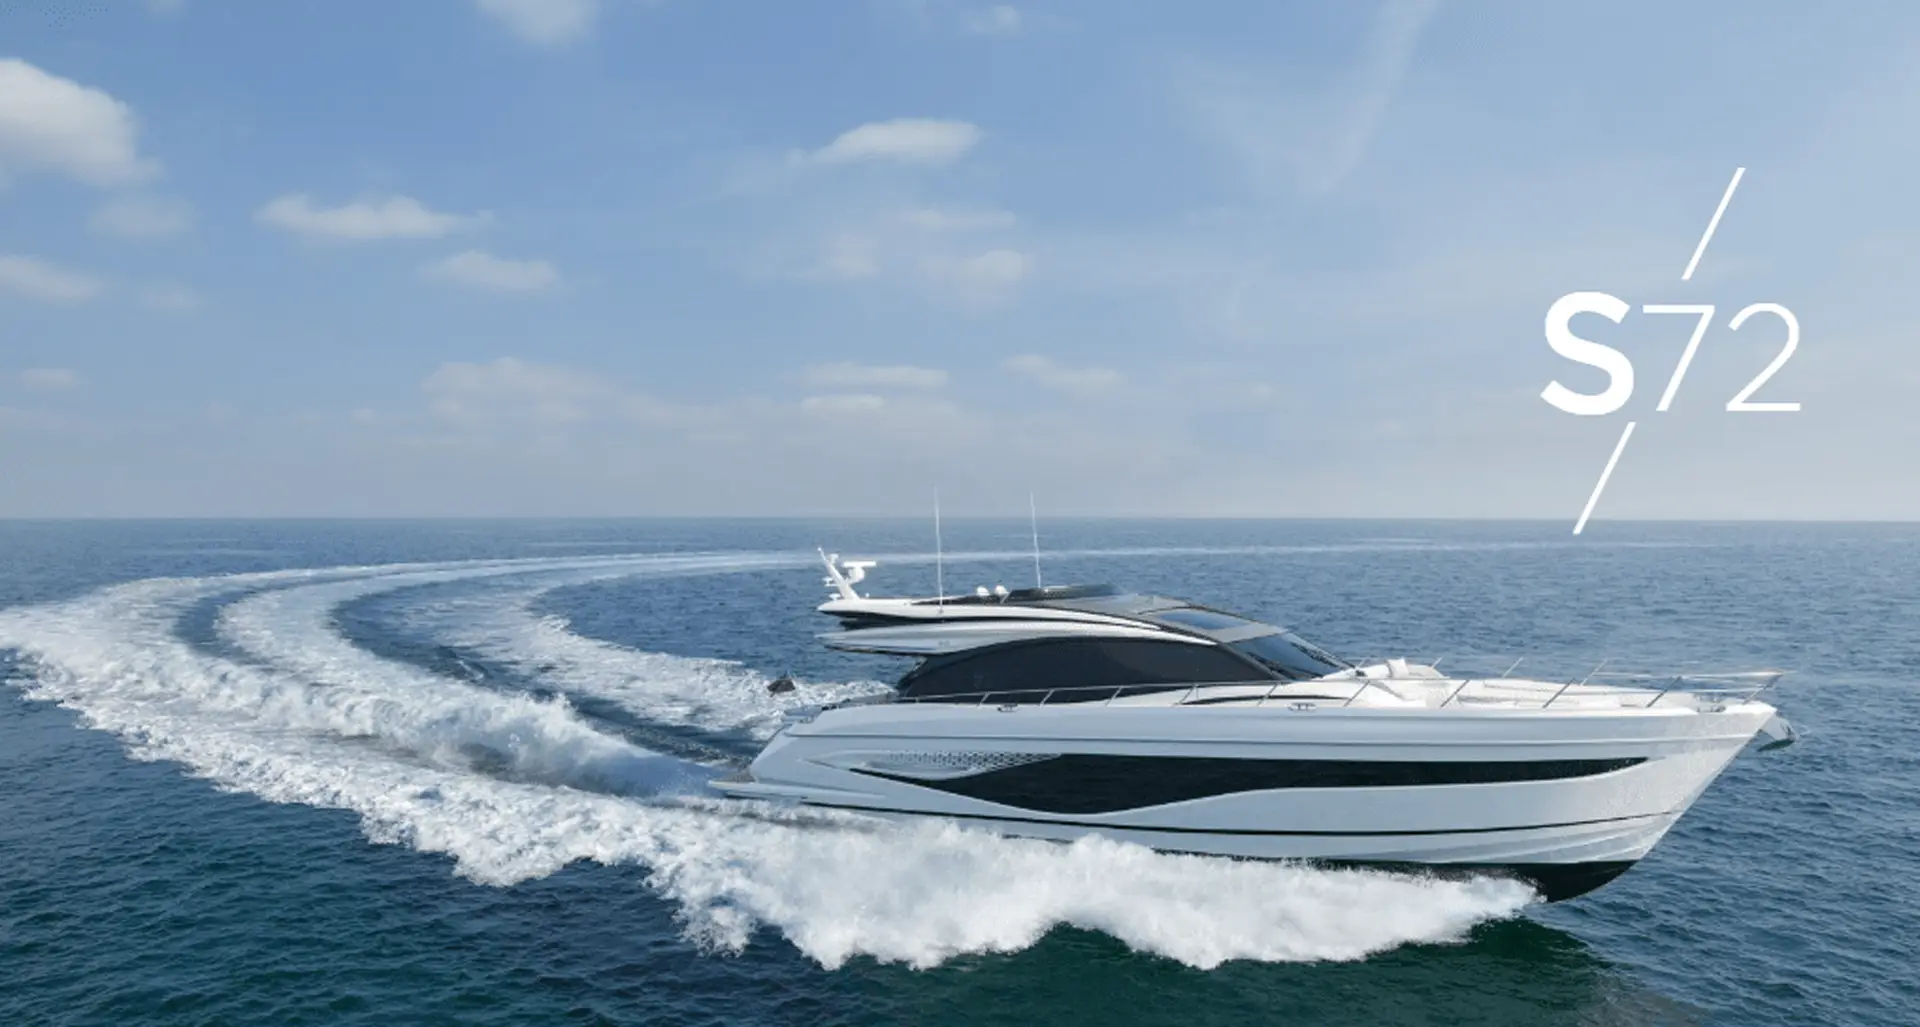 High-performance yacht Princess S72 making a swift turn on the sea, leaving a curved wake in its path.